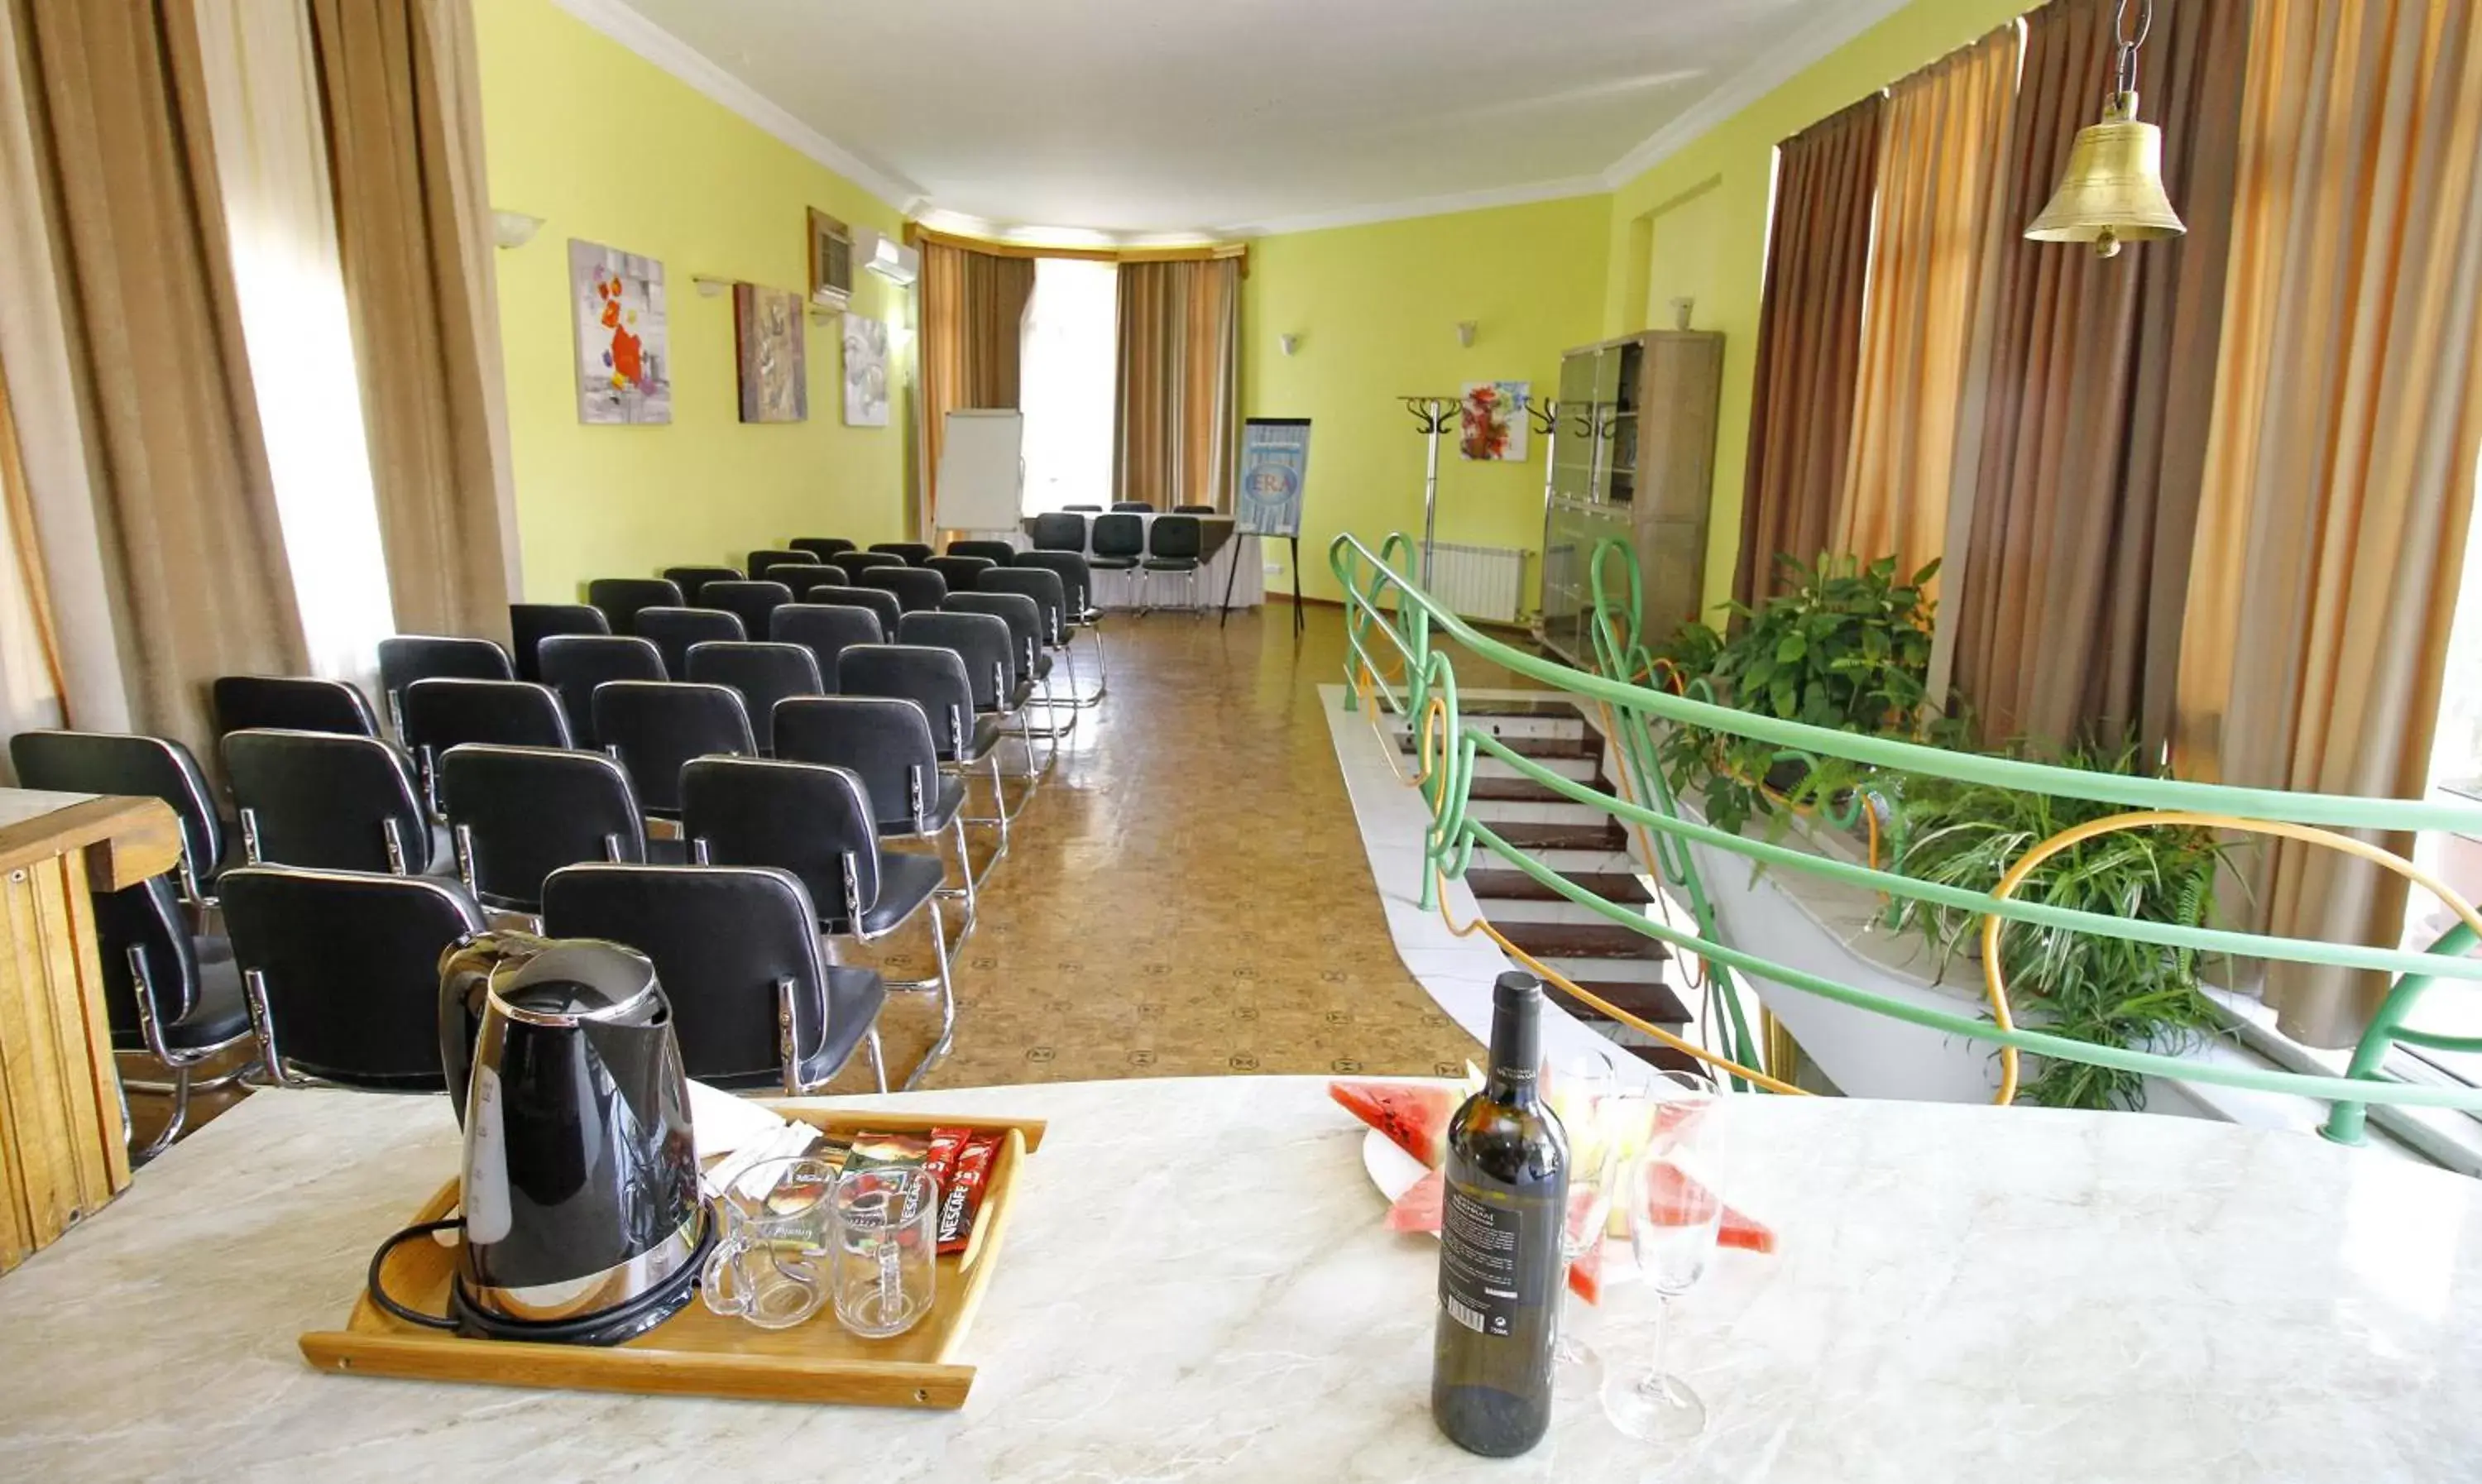 Area and facilities in Irmeni Hotel